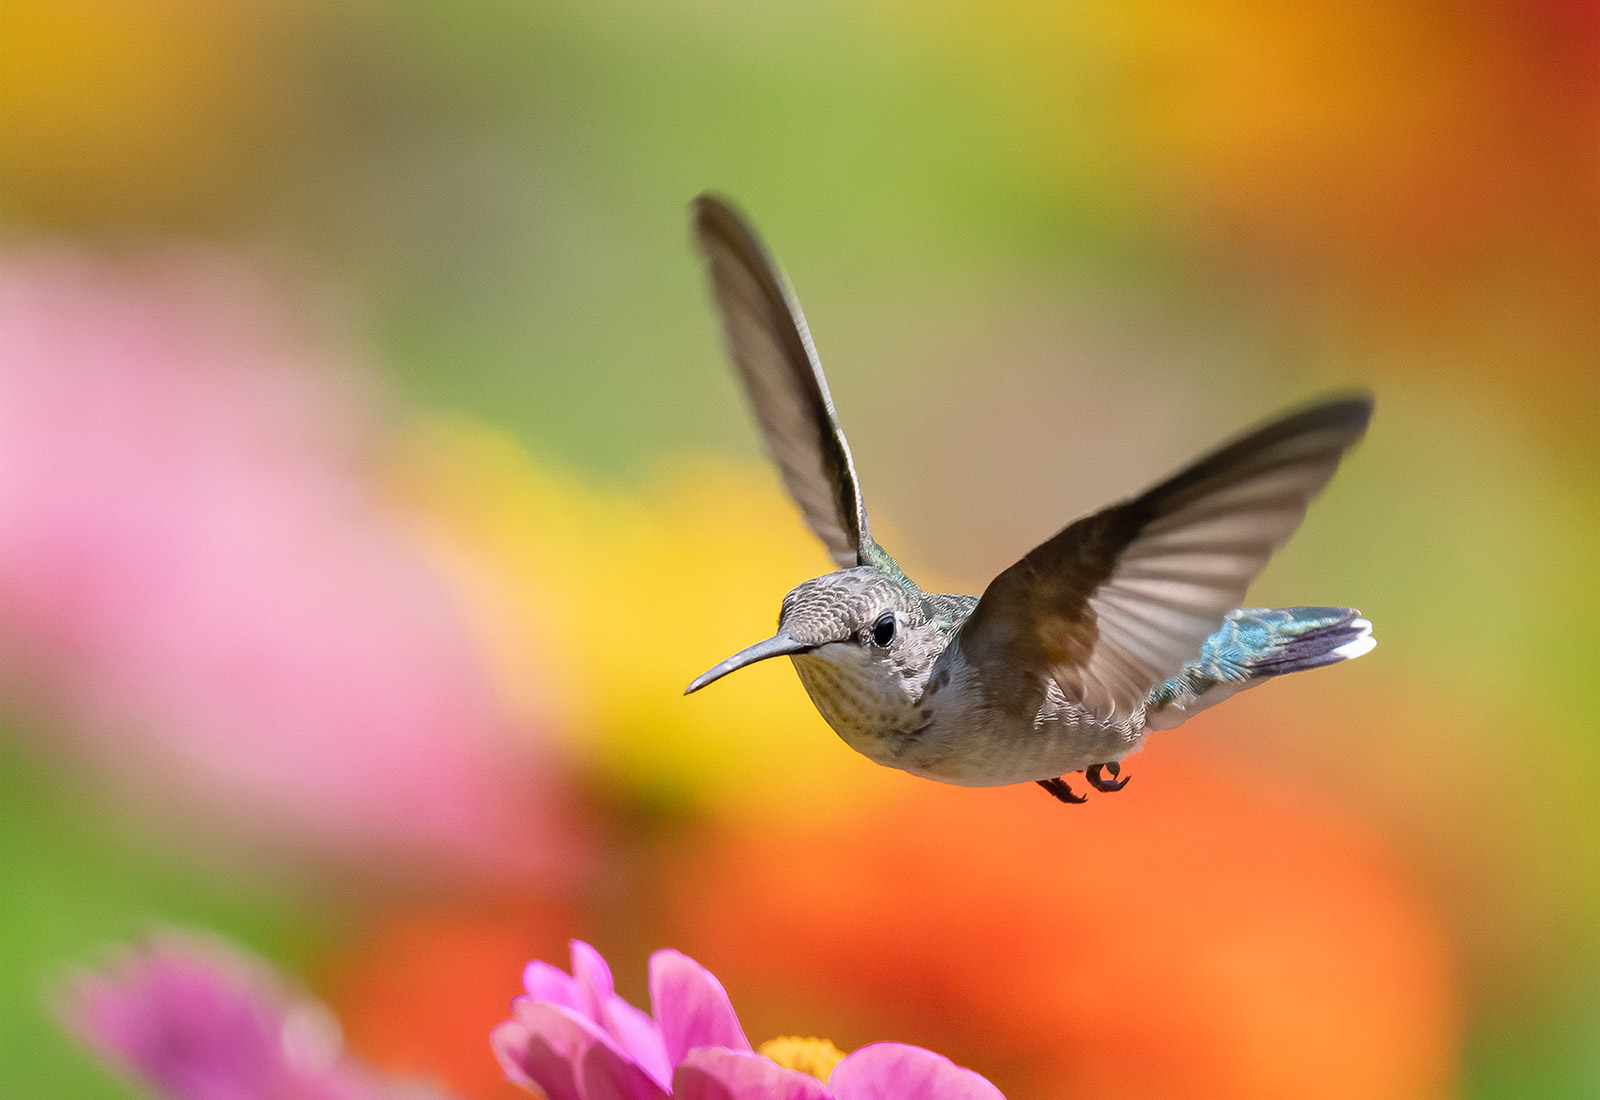 Ruby-throated Hummingbird hovers in the flowers